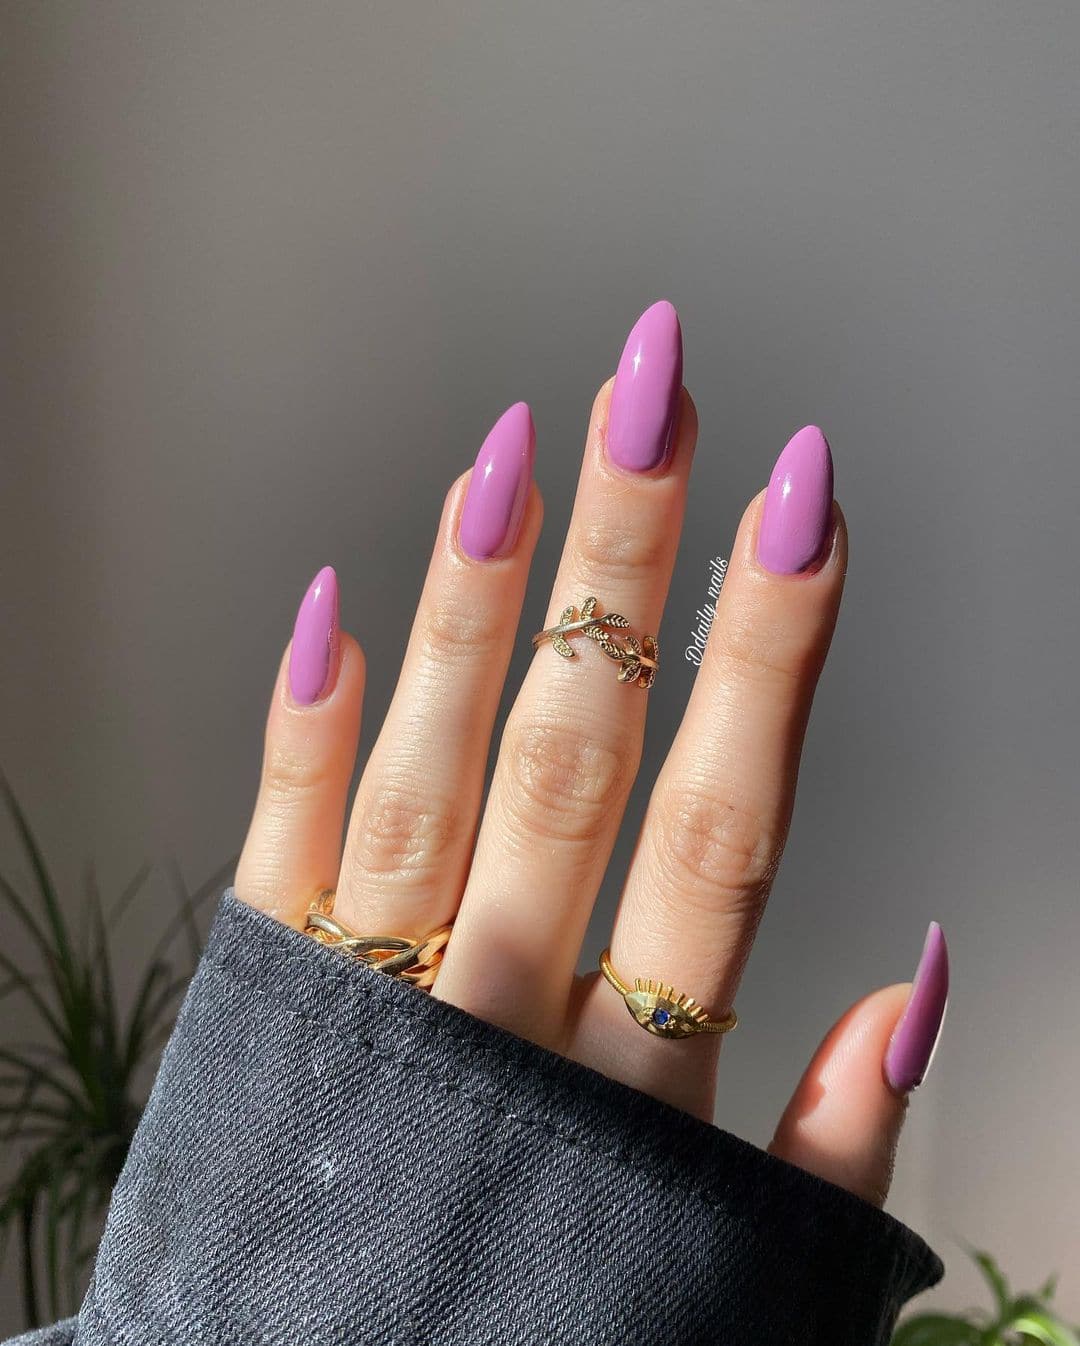 70 Bright Summer Nails You'll Want to Copy